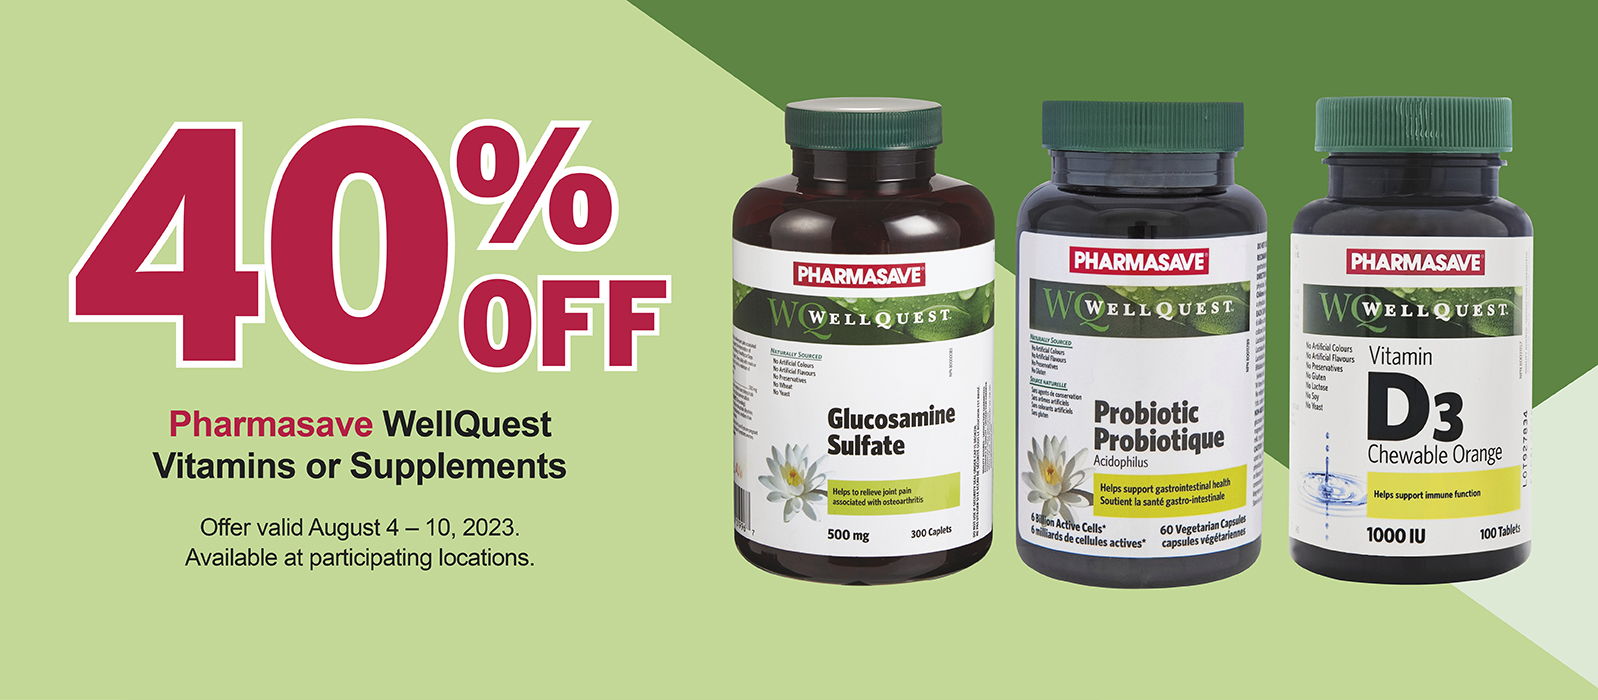 40% off on Pharmasave WellQuest Vitamins or supplements from August 4-10, 2023